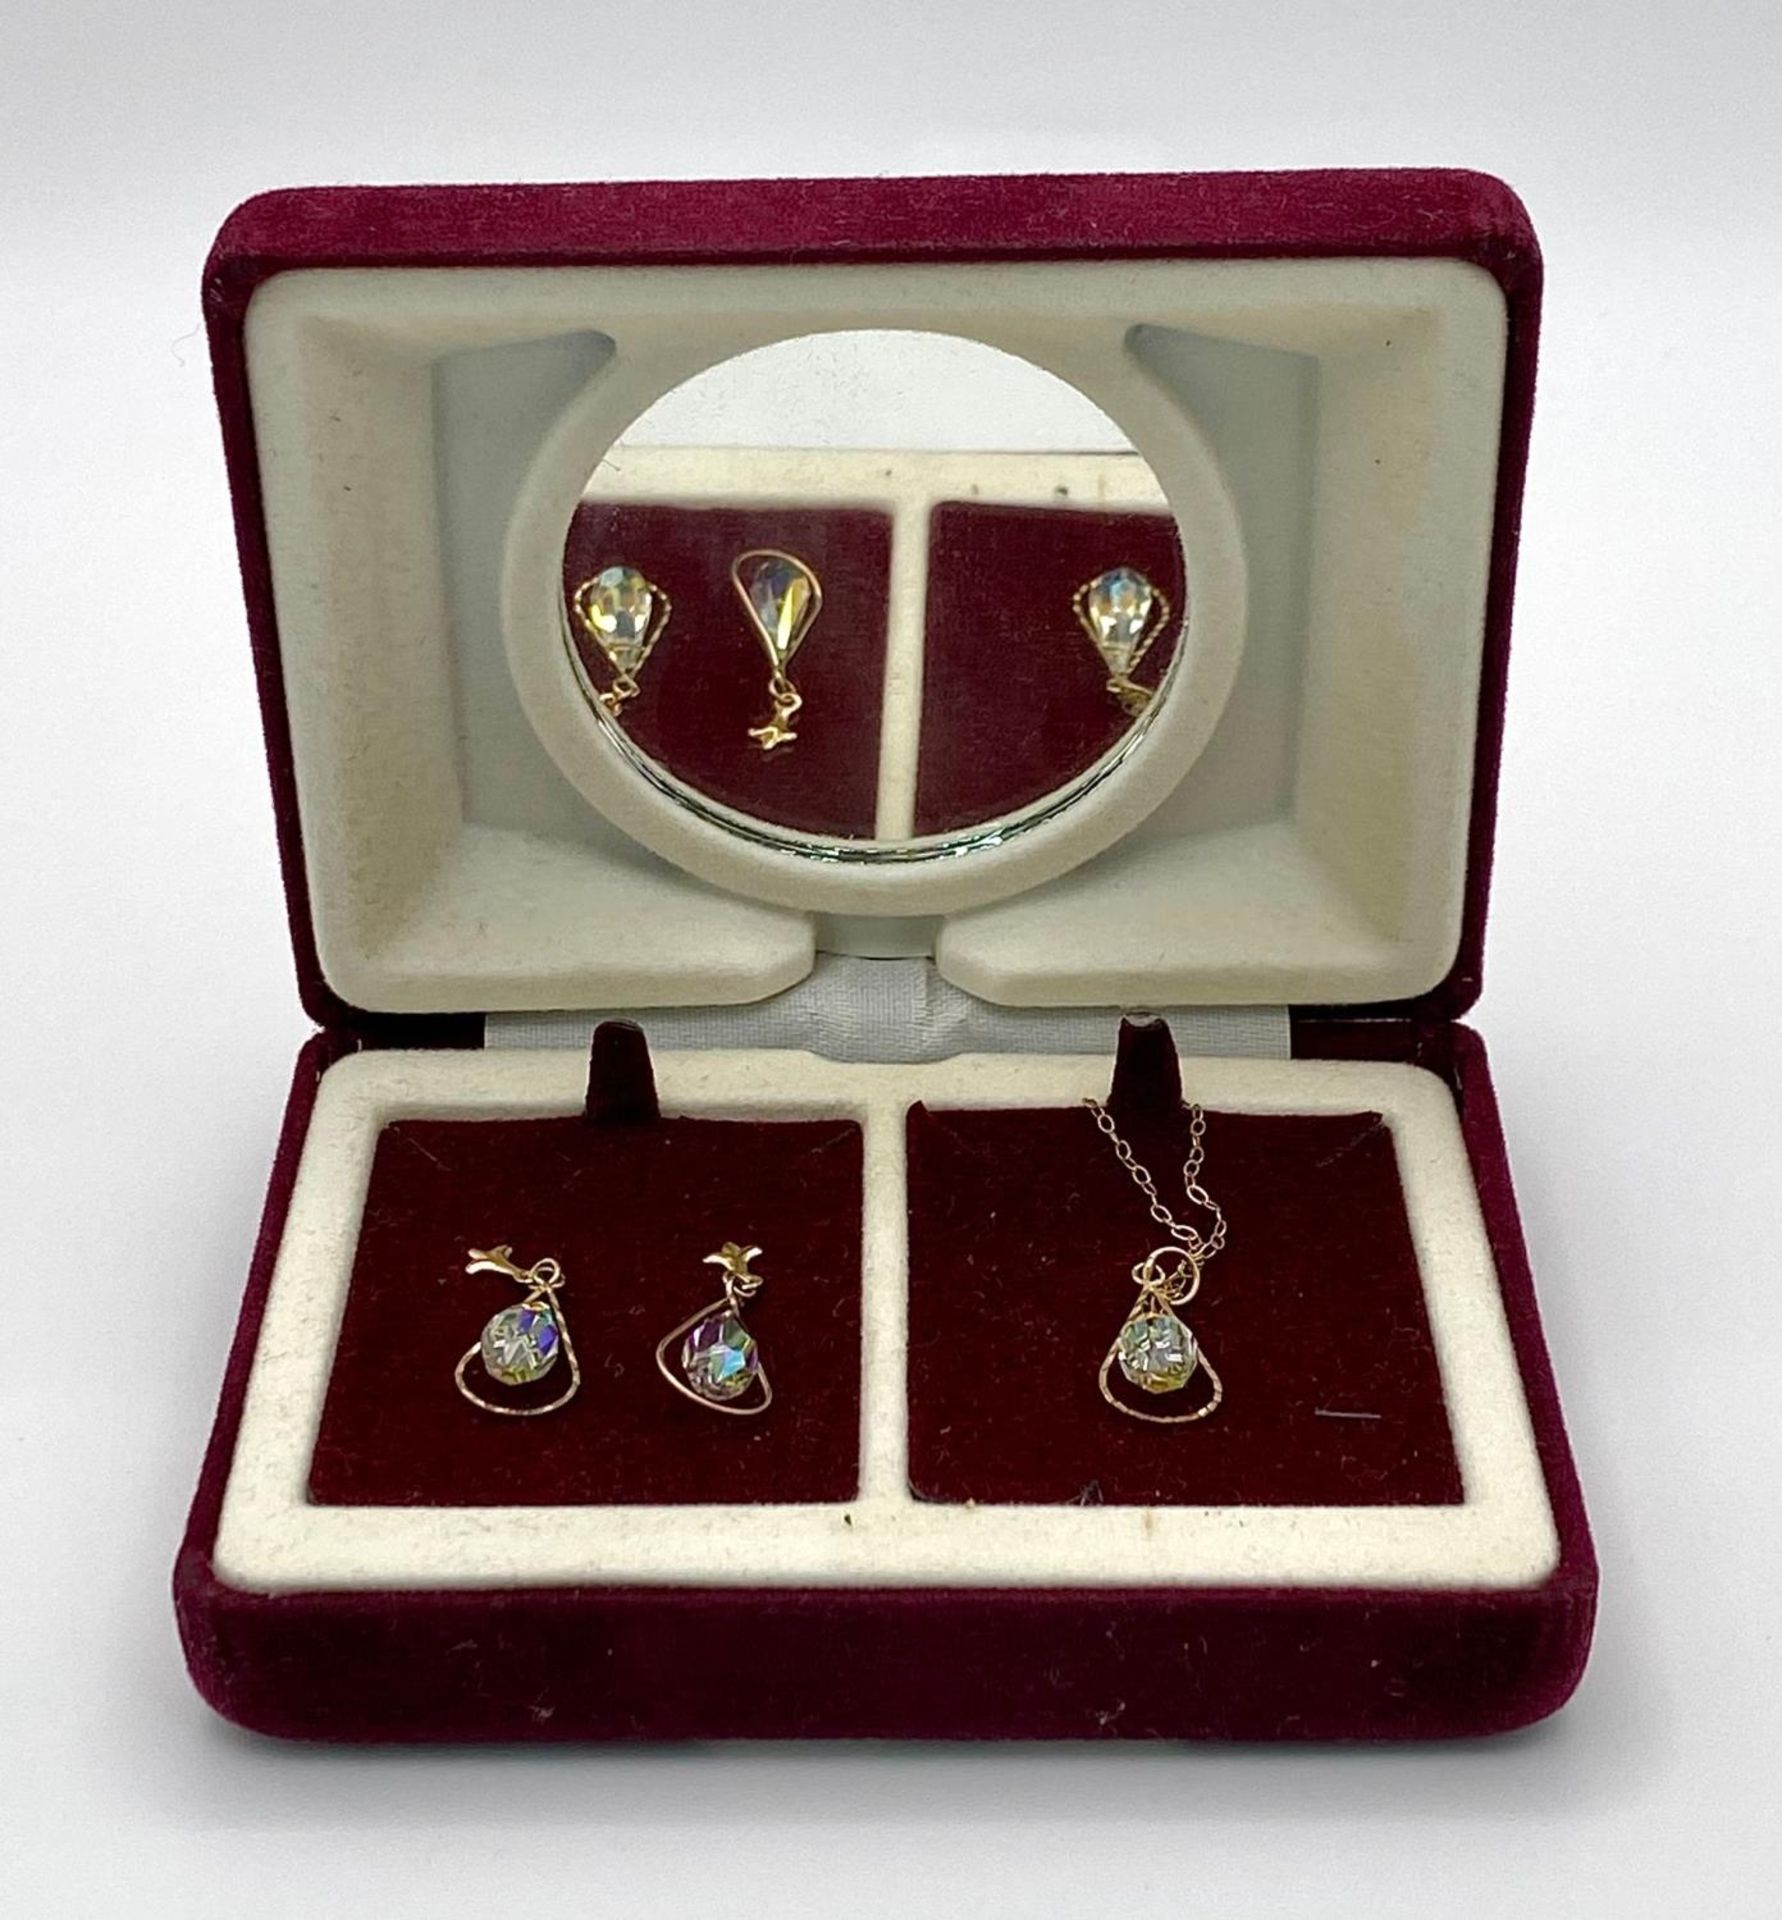 A vintage 9 K yellow gold earrings and pendant set with chain. Adorned with mystic crystals. In